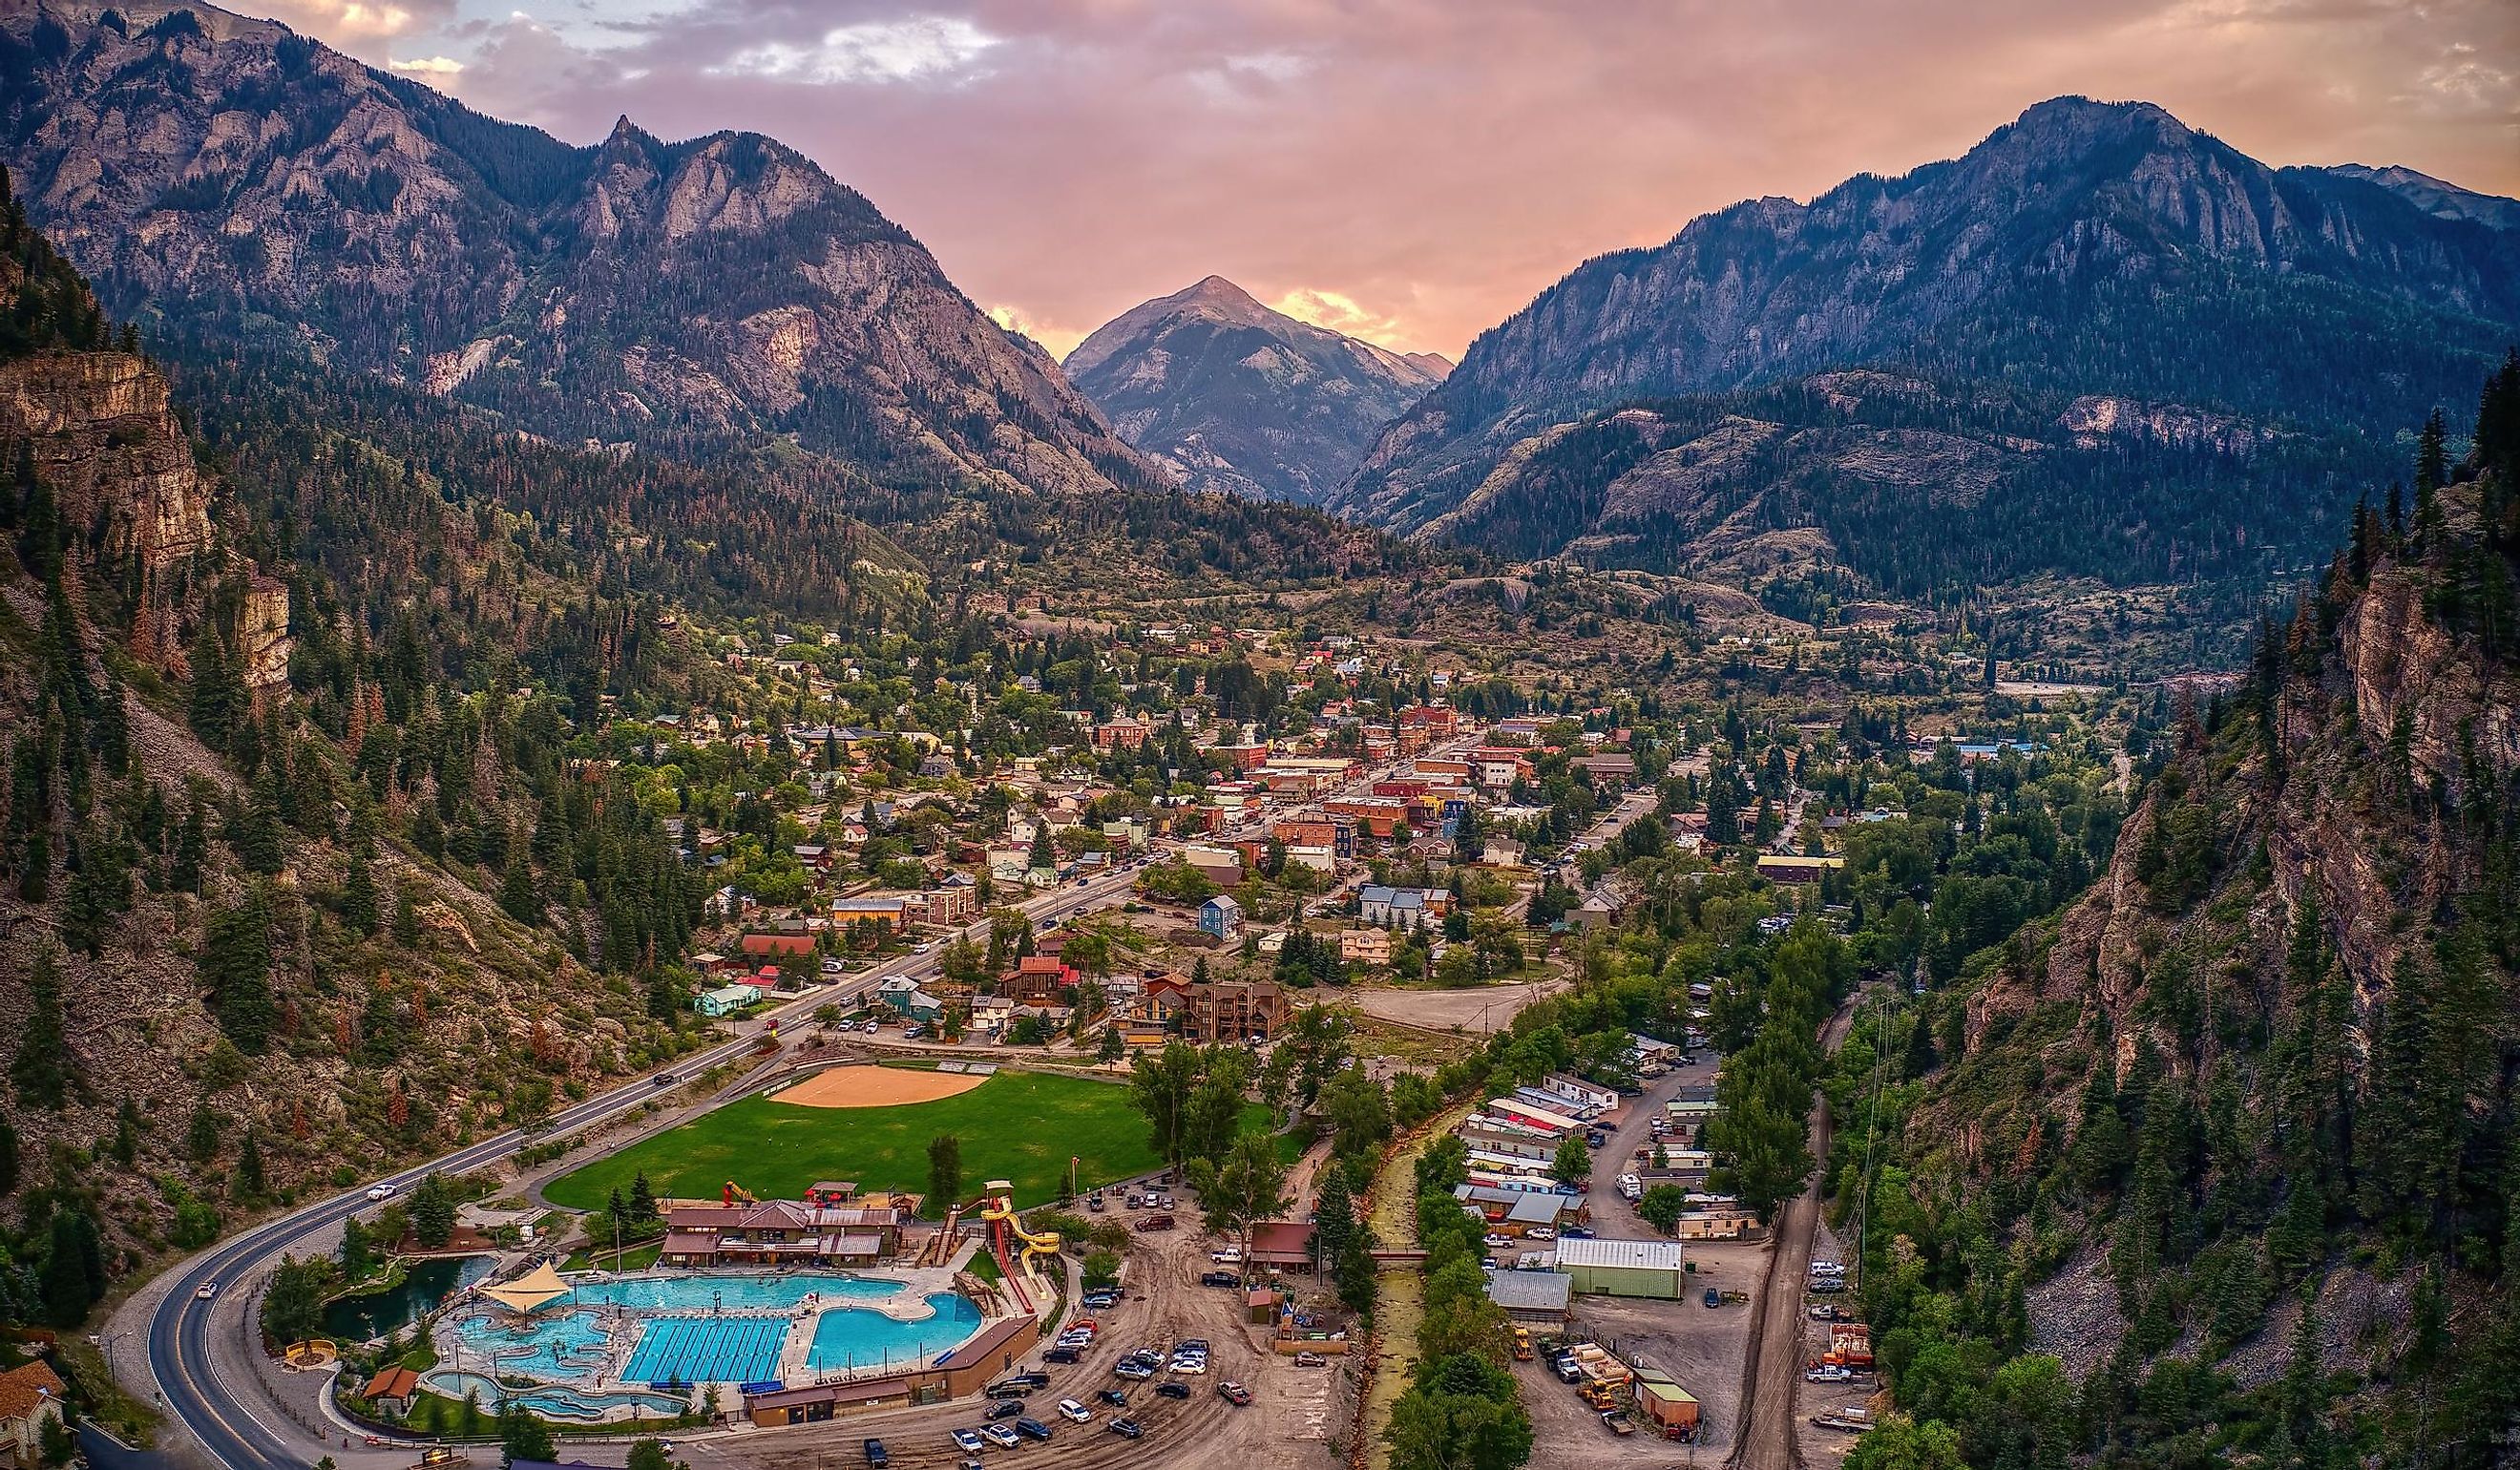 Ouray is a Tourist Mountain Town with a Hot Springs Aquatic Center.